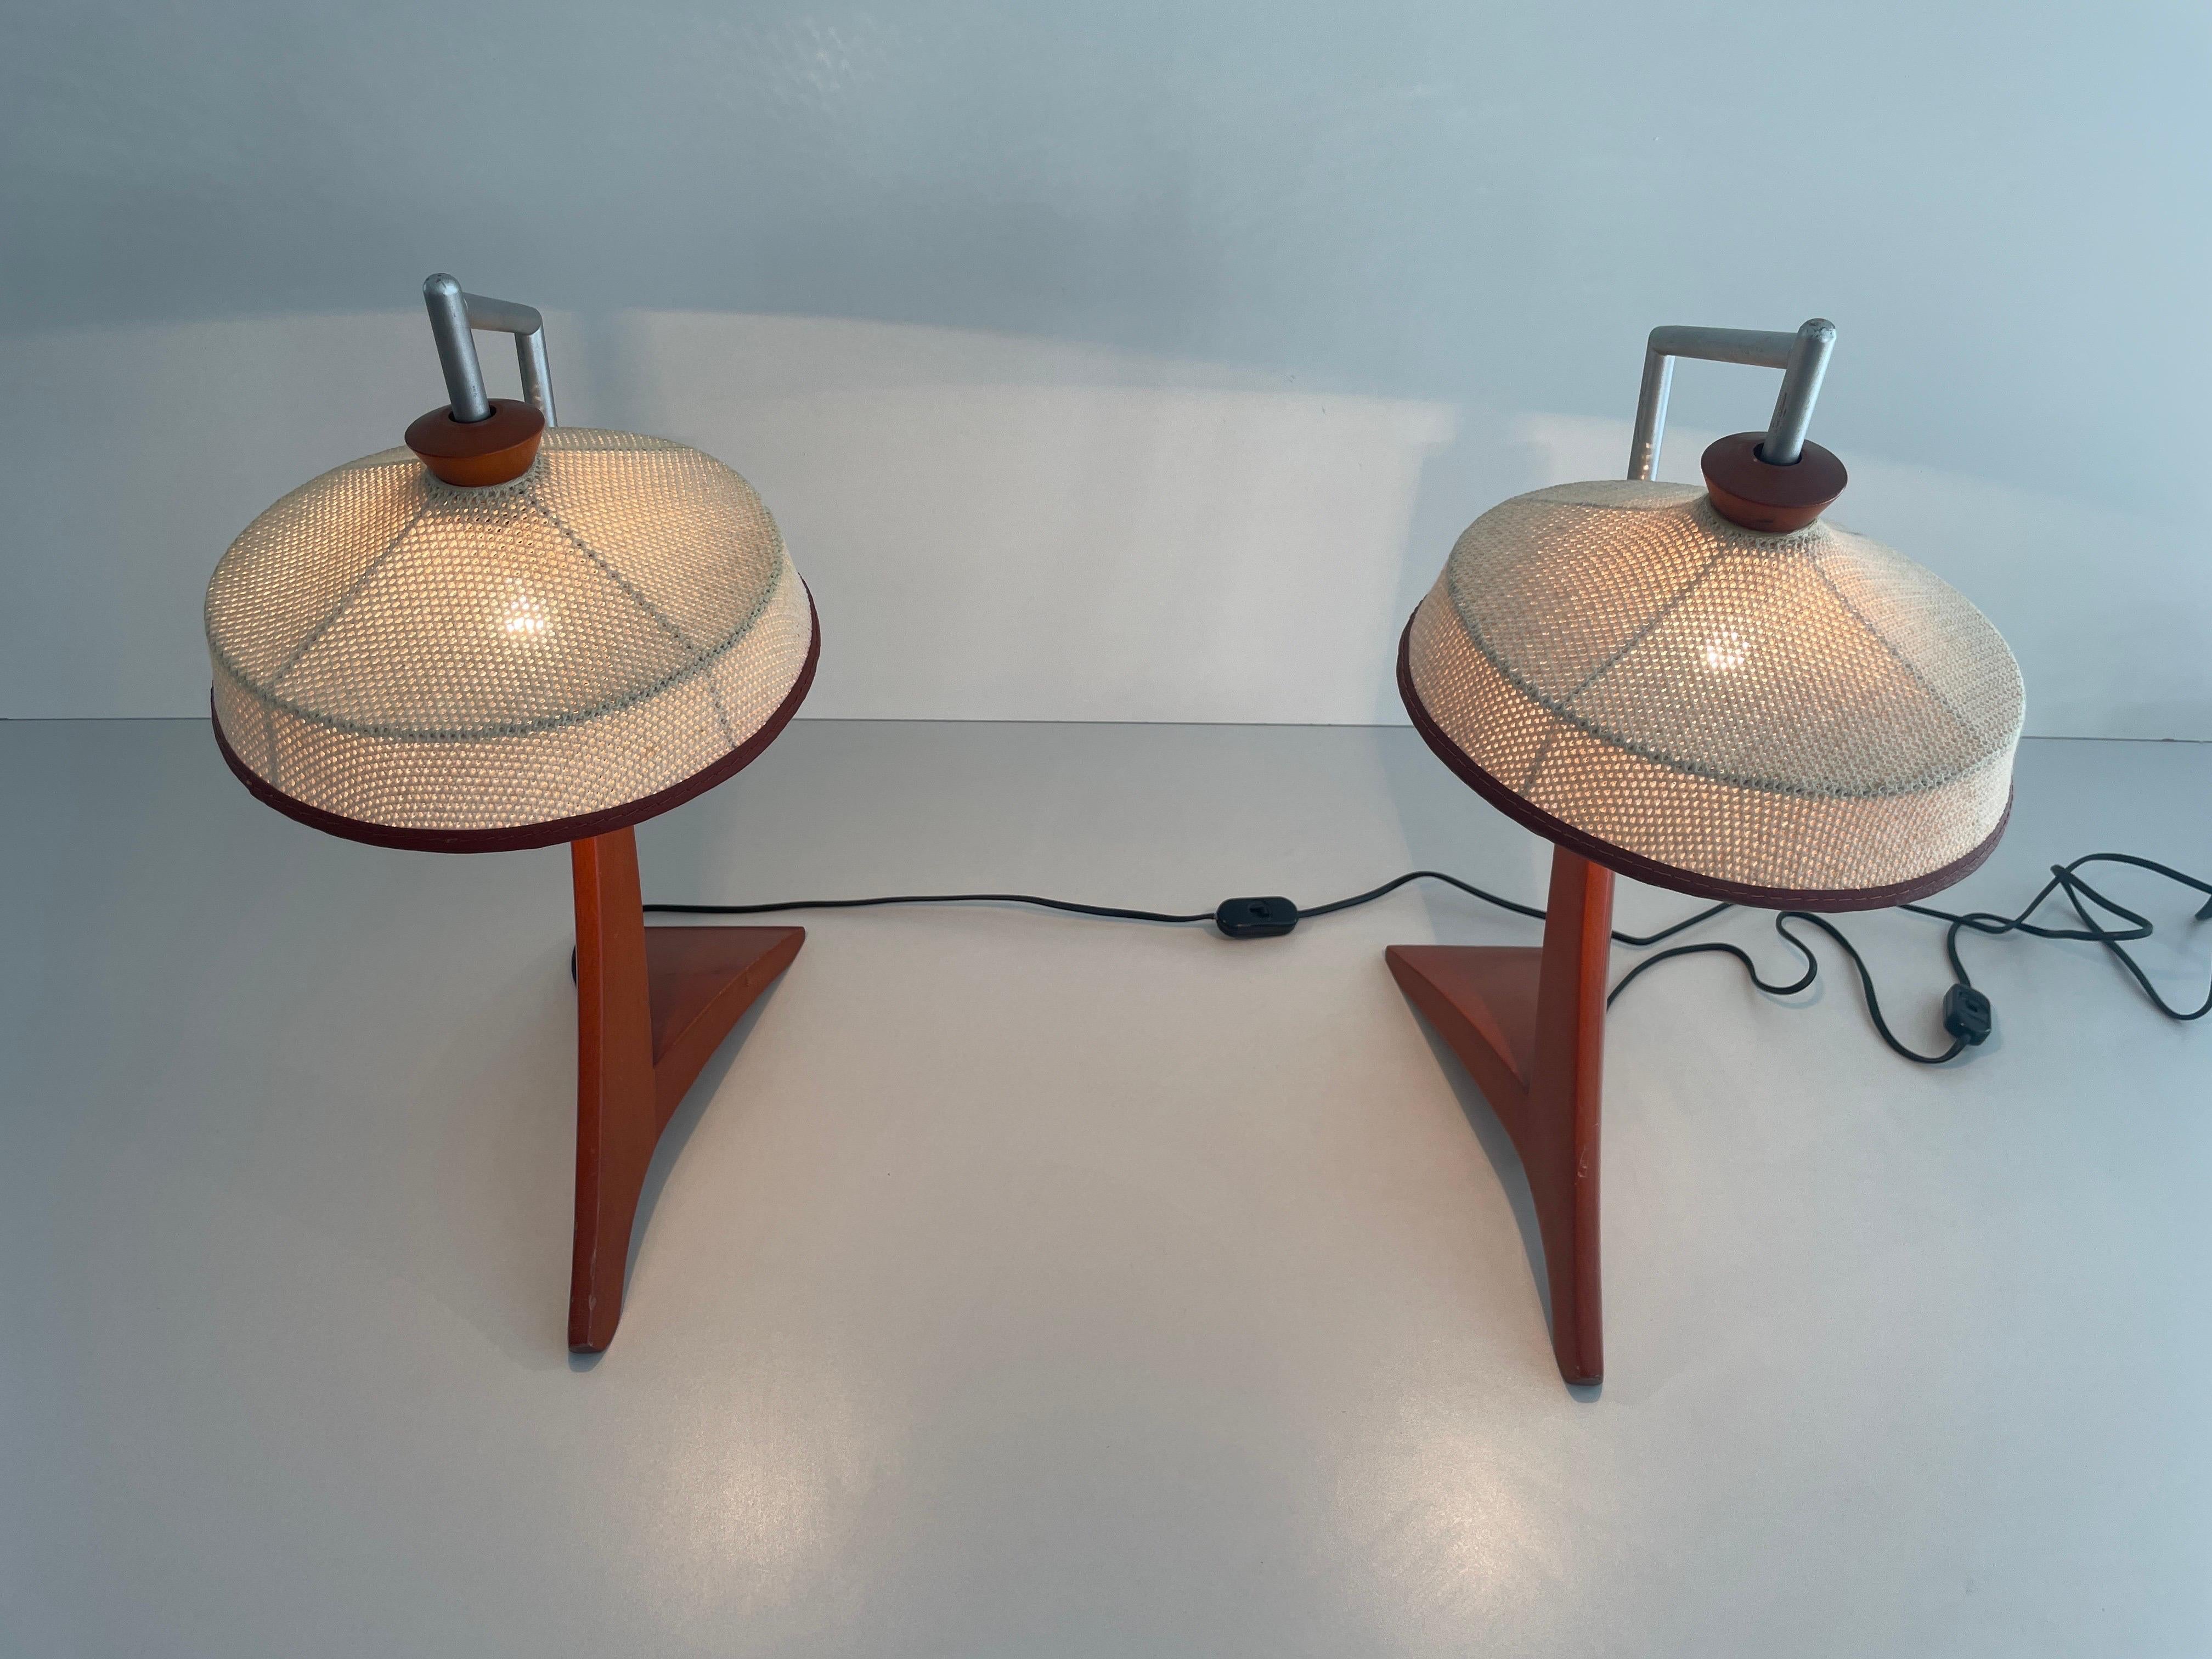  Wood and Woven Thread Shade Pair of Tall Table Lamps, 1960s, Italy 7